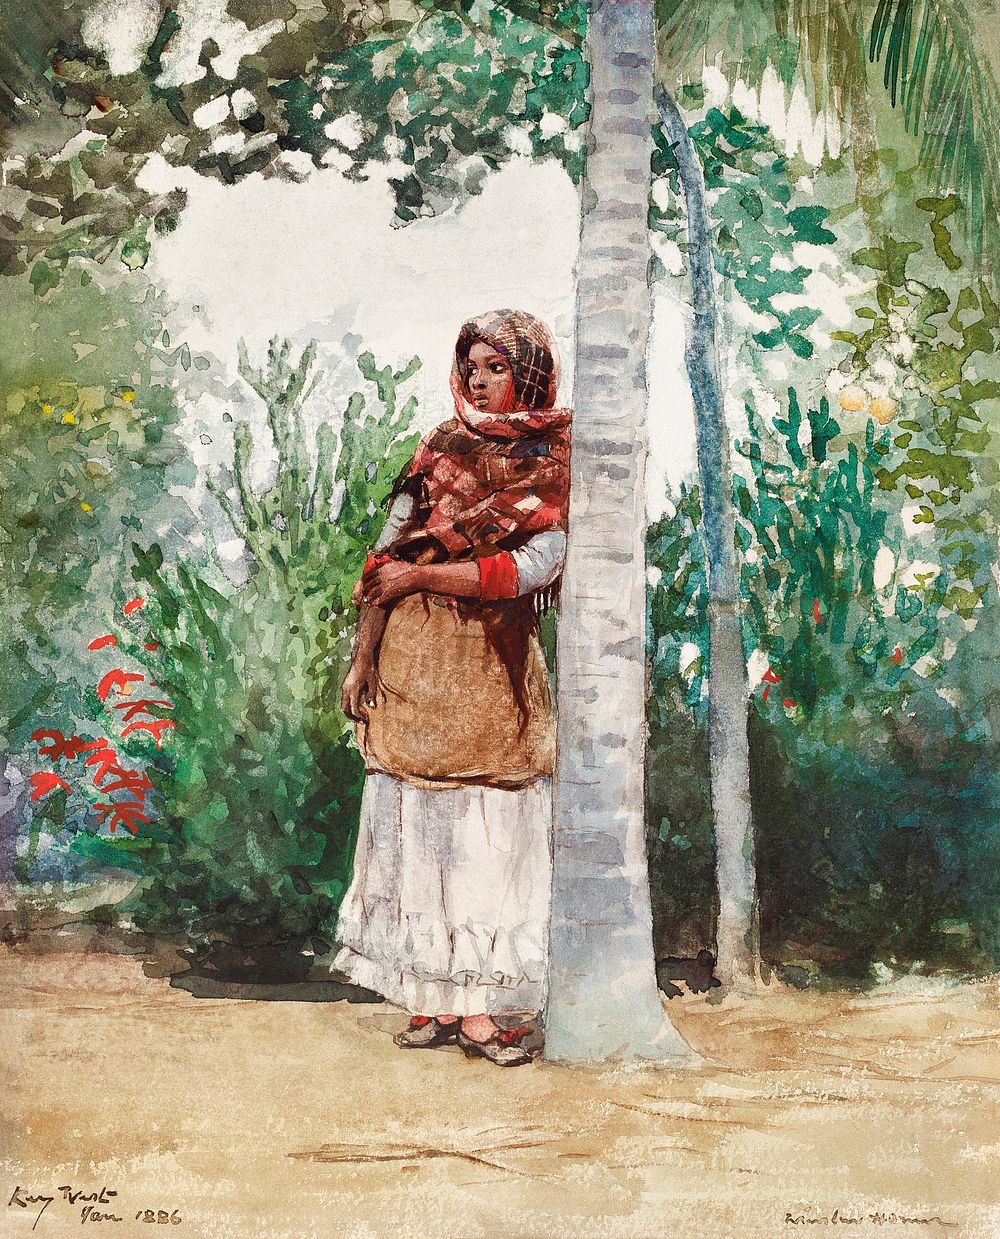 Under a Palm Tree (1886) by Winslow Homer. Original from The National Gallery of Art. Digitally enhanced by rawpixel.